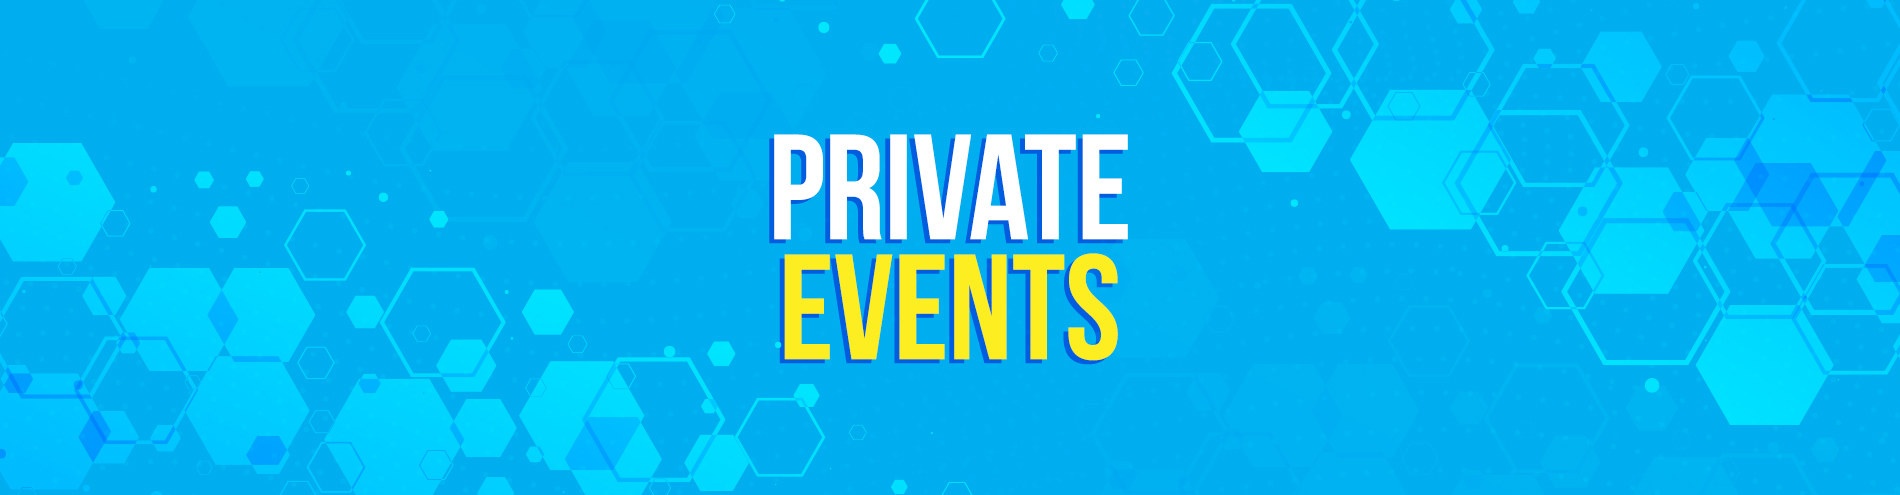 Private Events Header